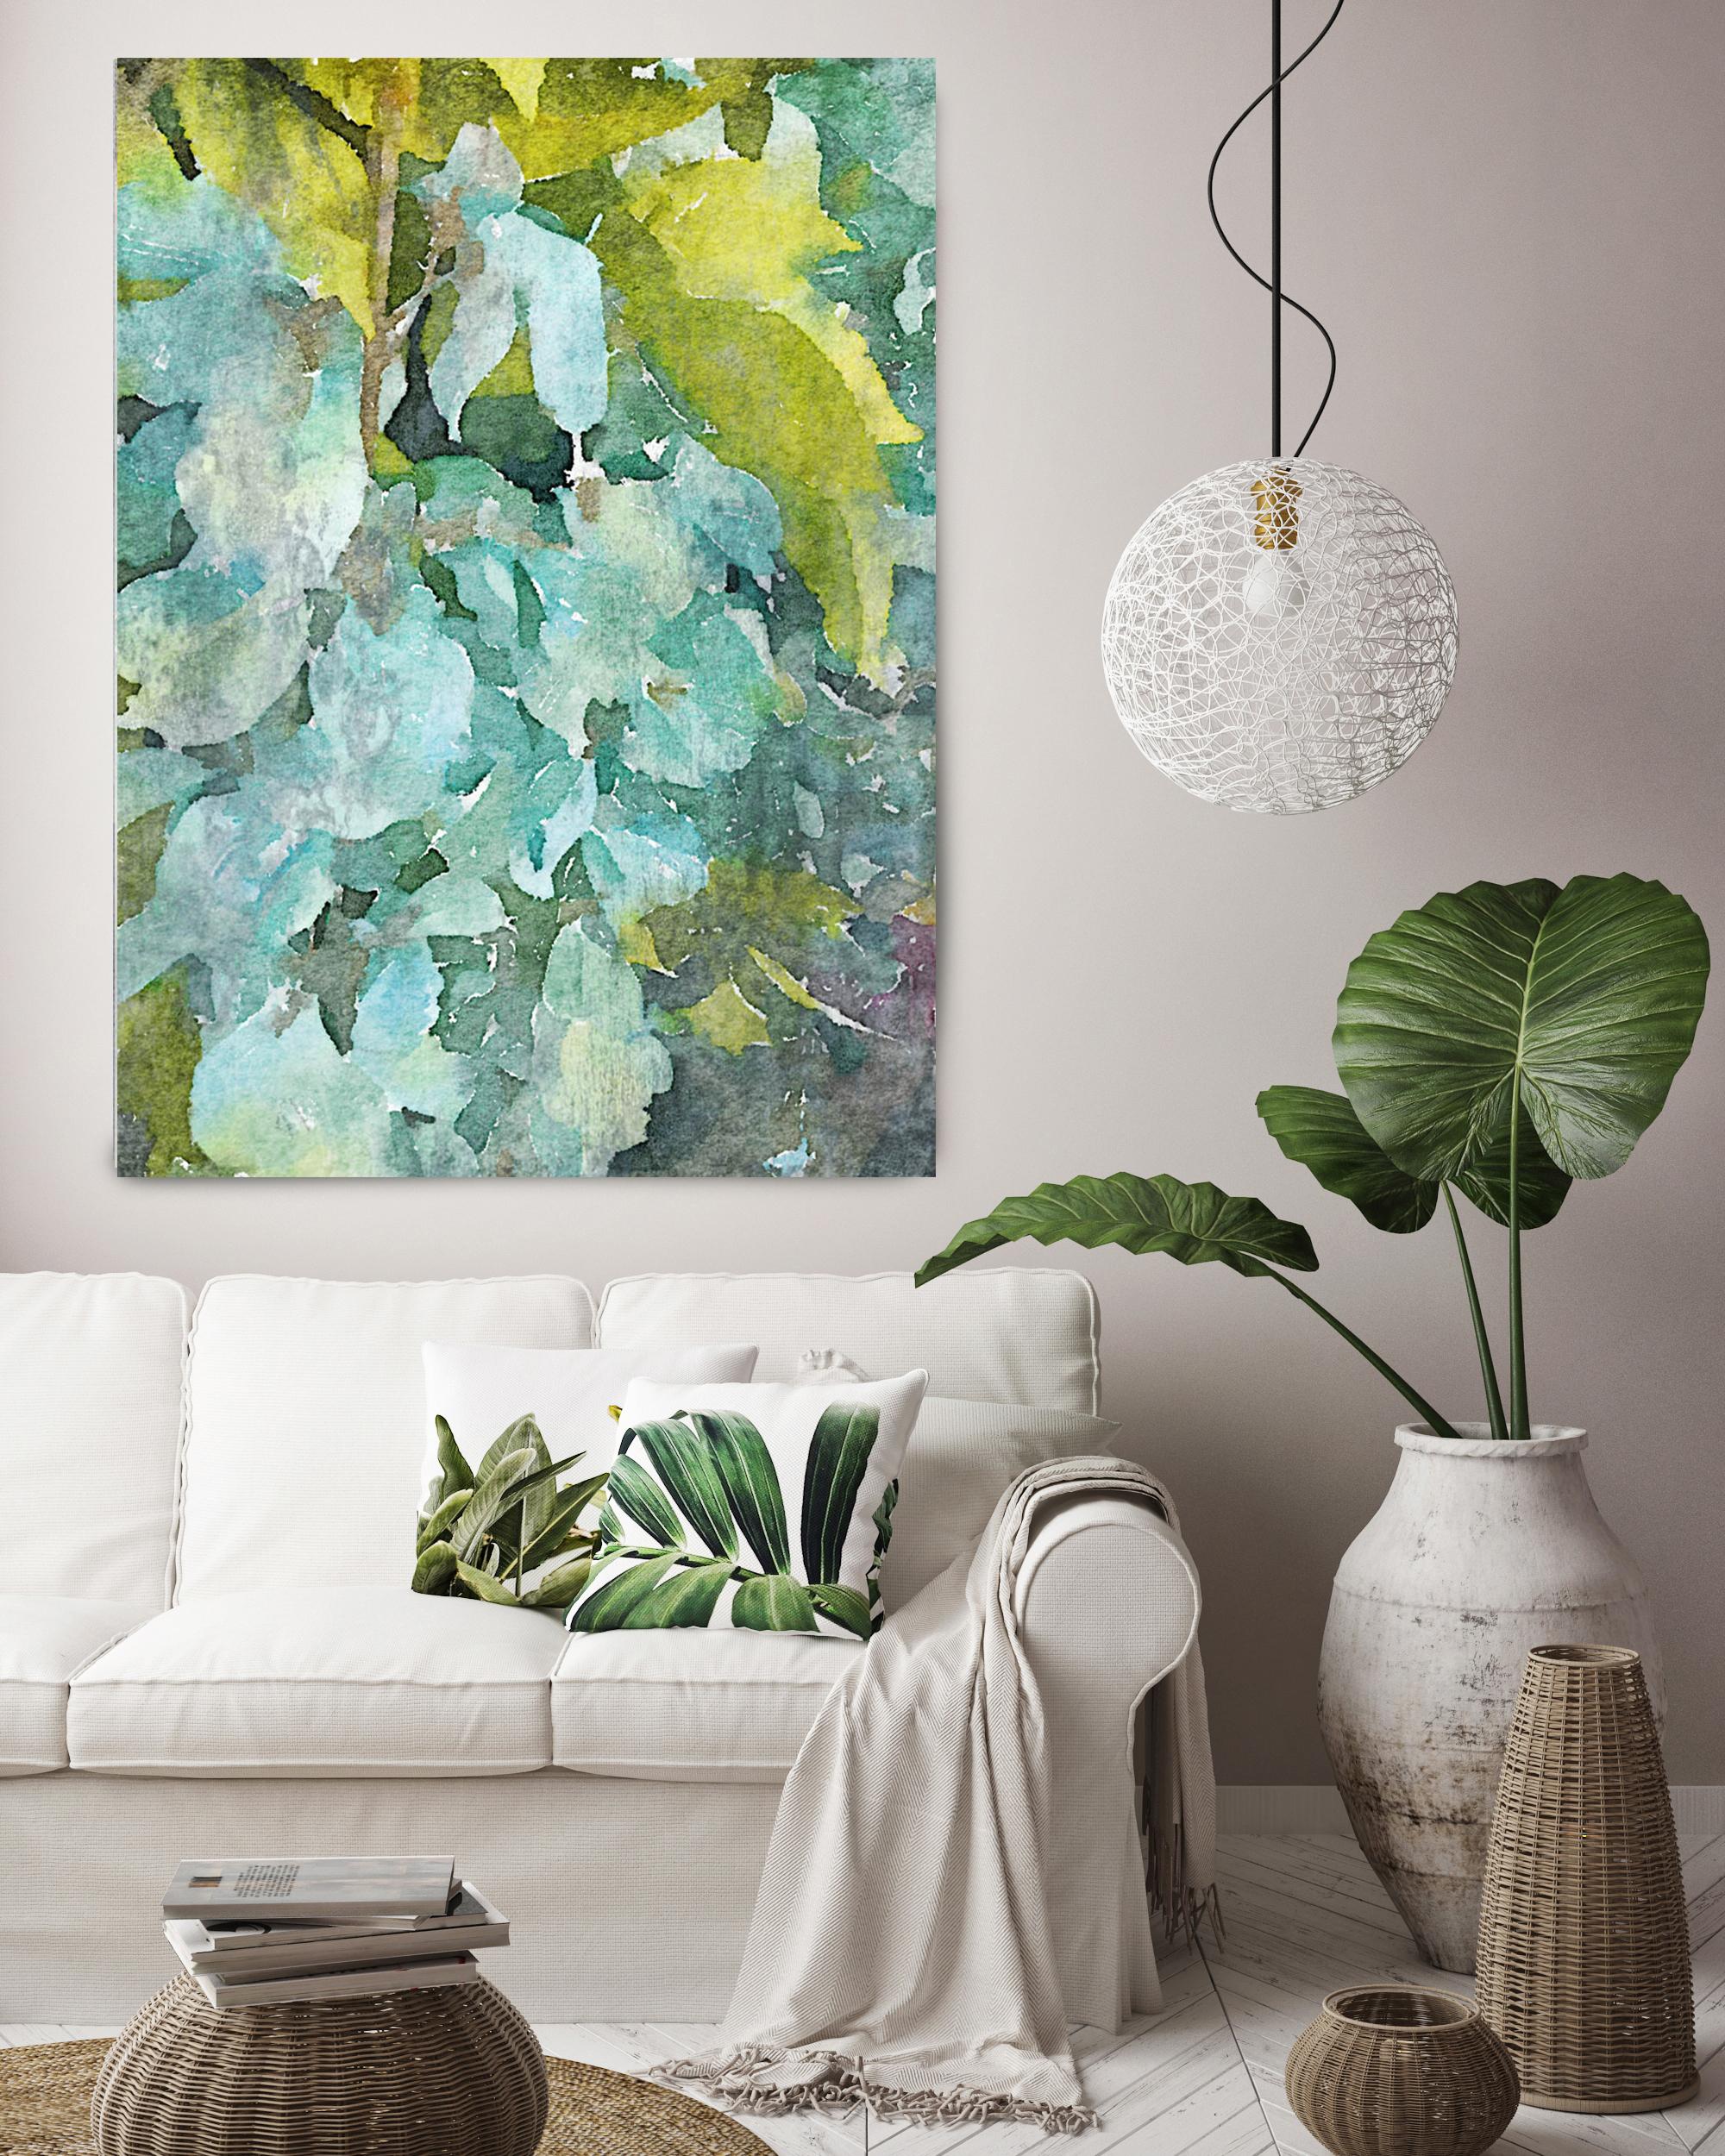 Summer Colors Rustic Flowers Painting Embellished Giclee on Canvas 40w X 60h

State-of-the-art HAND EMBELLISHED ∽ MUSEUM QUALITY ∽ DISPLAY READY Giclee Reproduction
Each limited edition Giclee is hand embellished by the artist, making it one of a